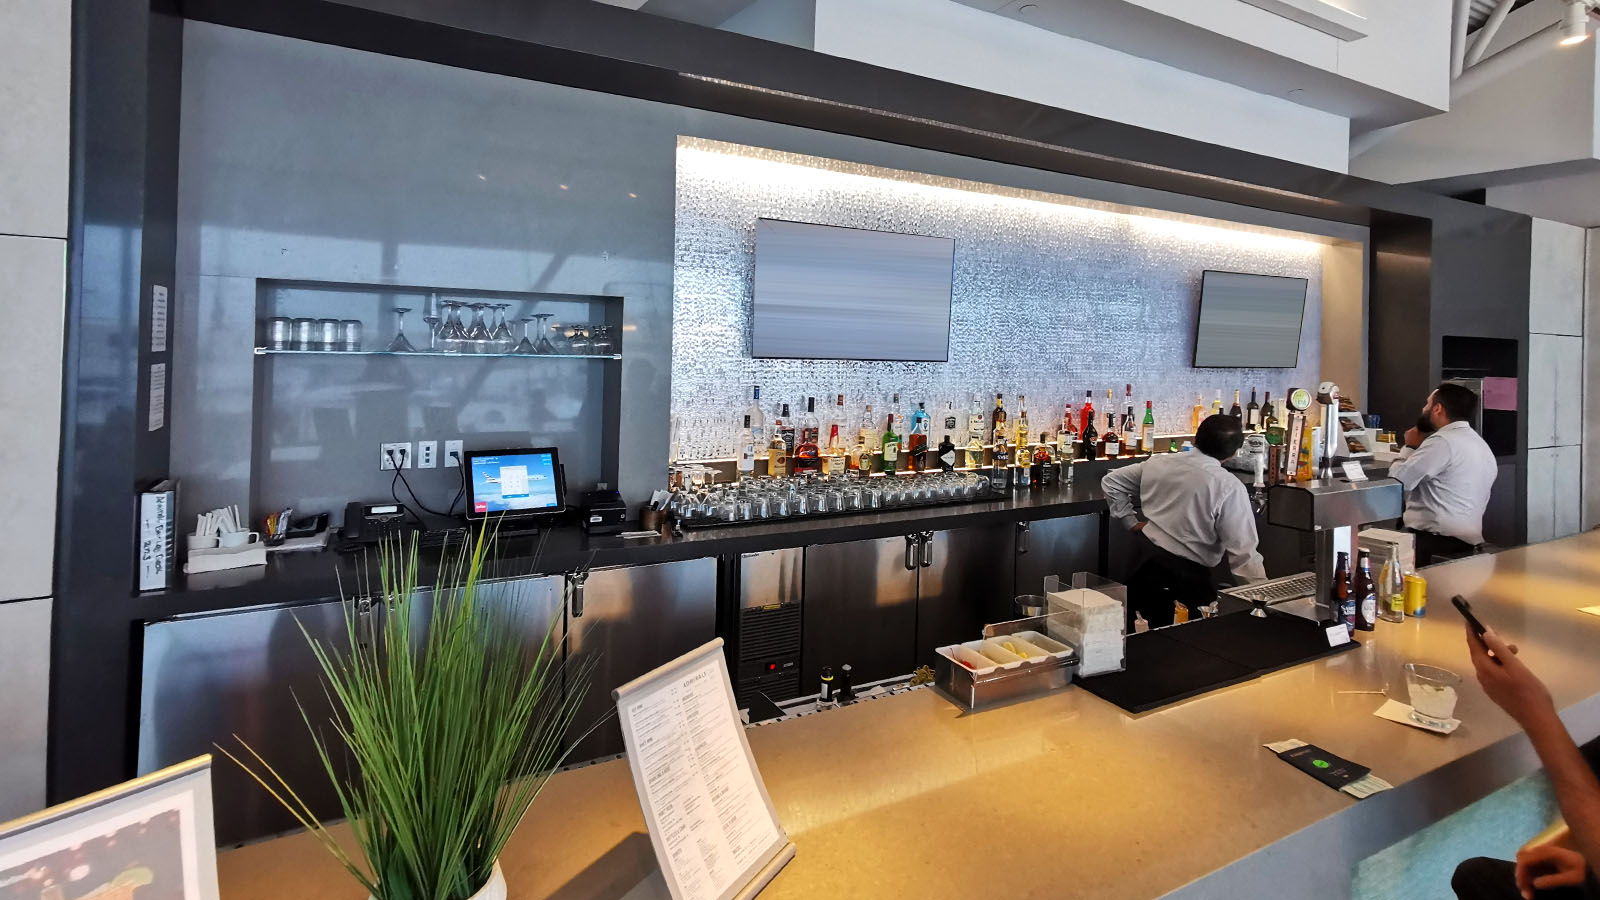 Service counter in the American Airlines Admirals Club, Los Angeles